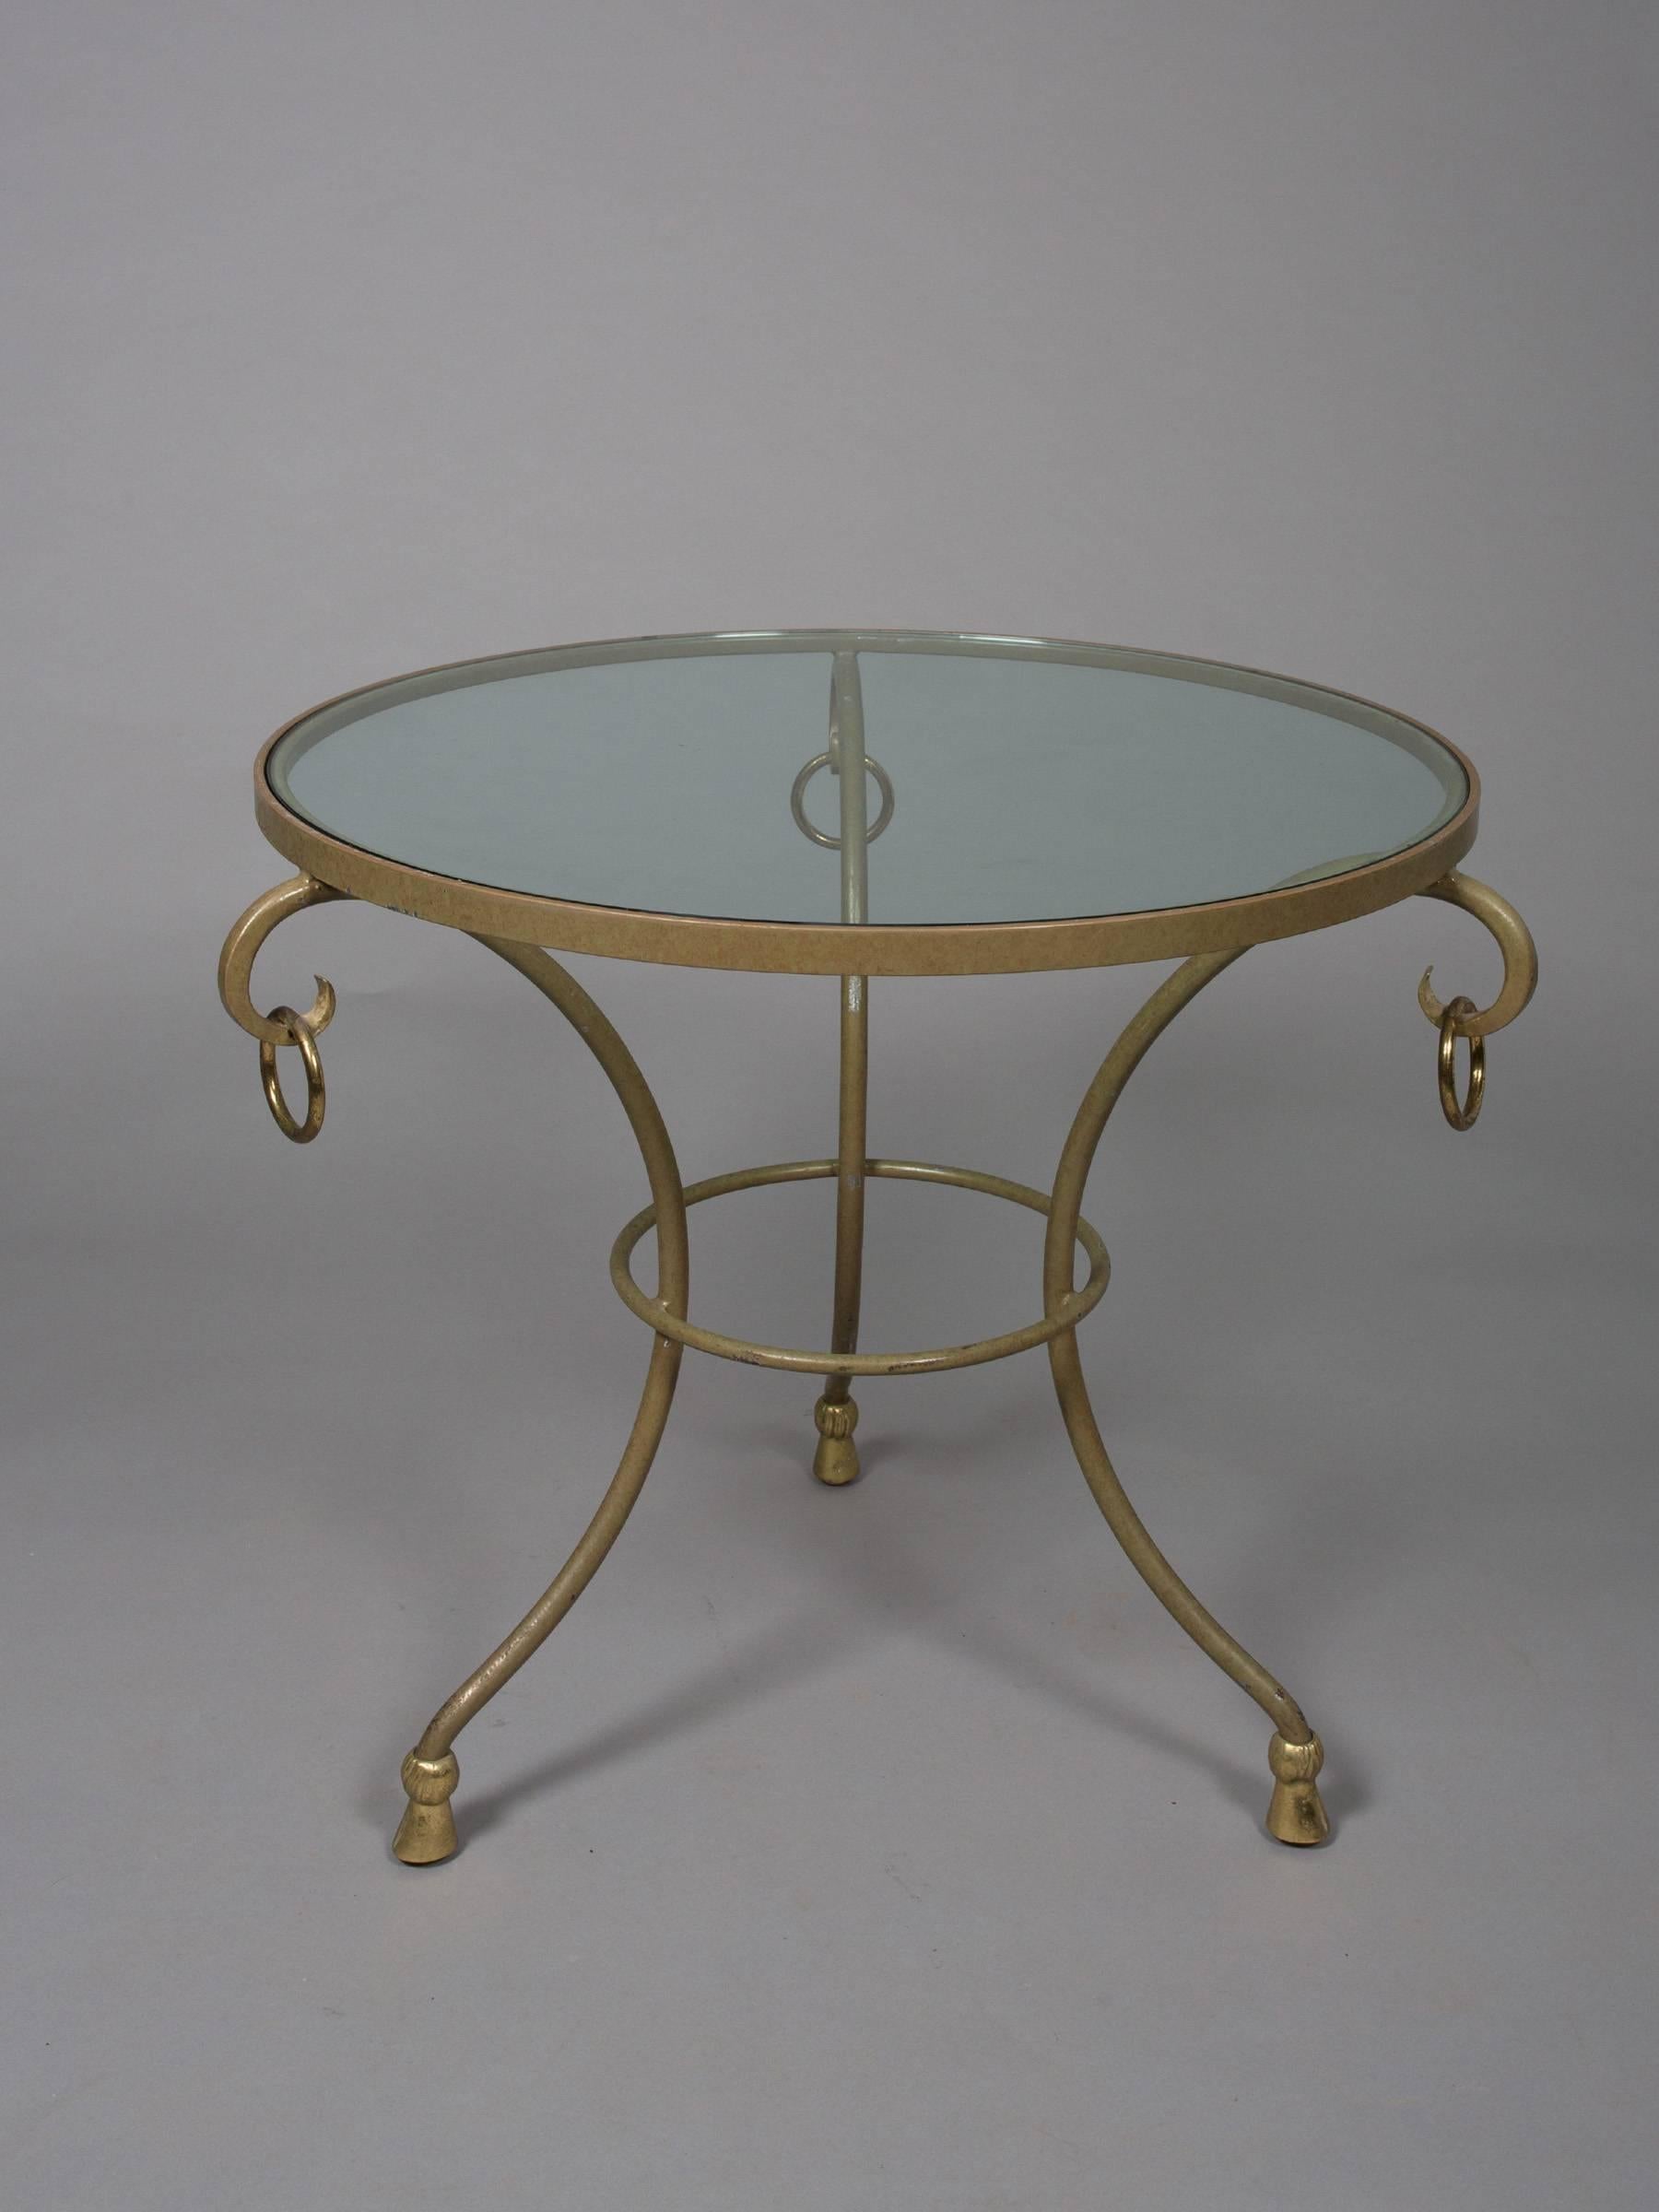 Pair of gold painted metal gueridons with hoop ring details and curved legs. Great patination throughout.